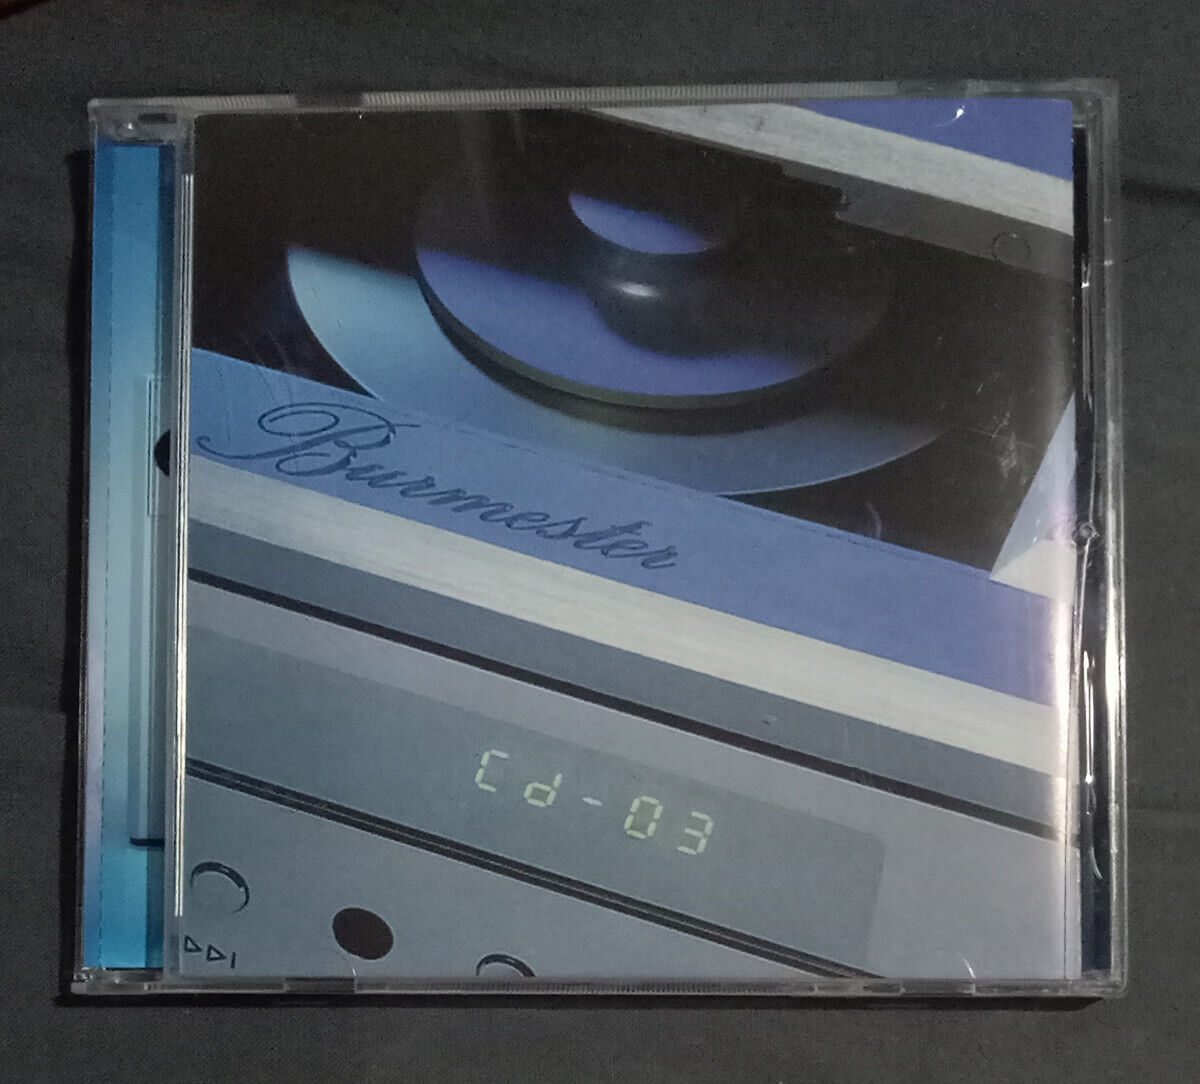 Burmester - Art For The Ear, Vorfuhrungs III, Audiophile Gold CD, Mint.